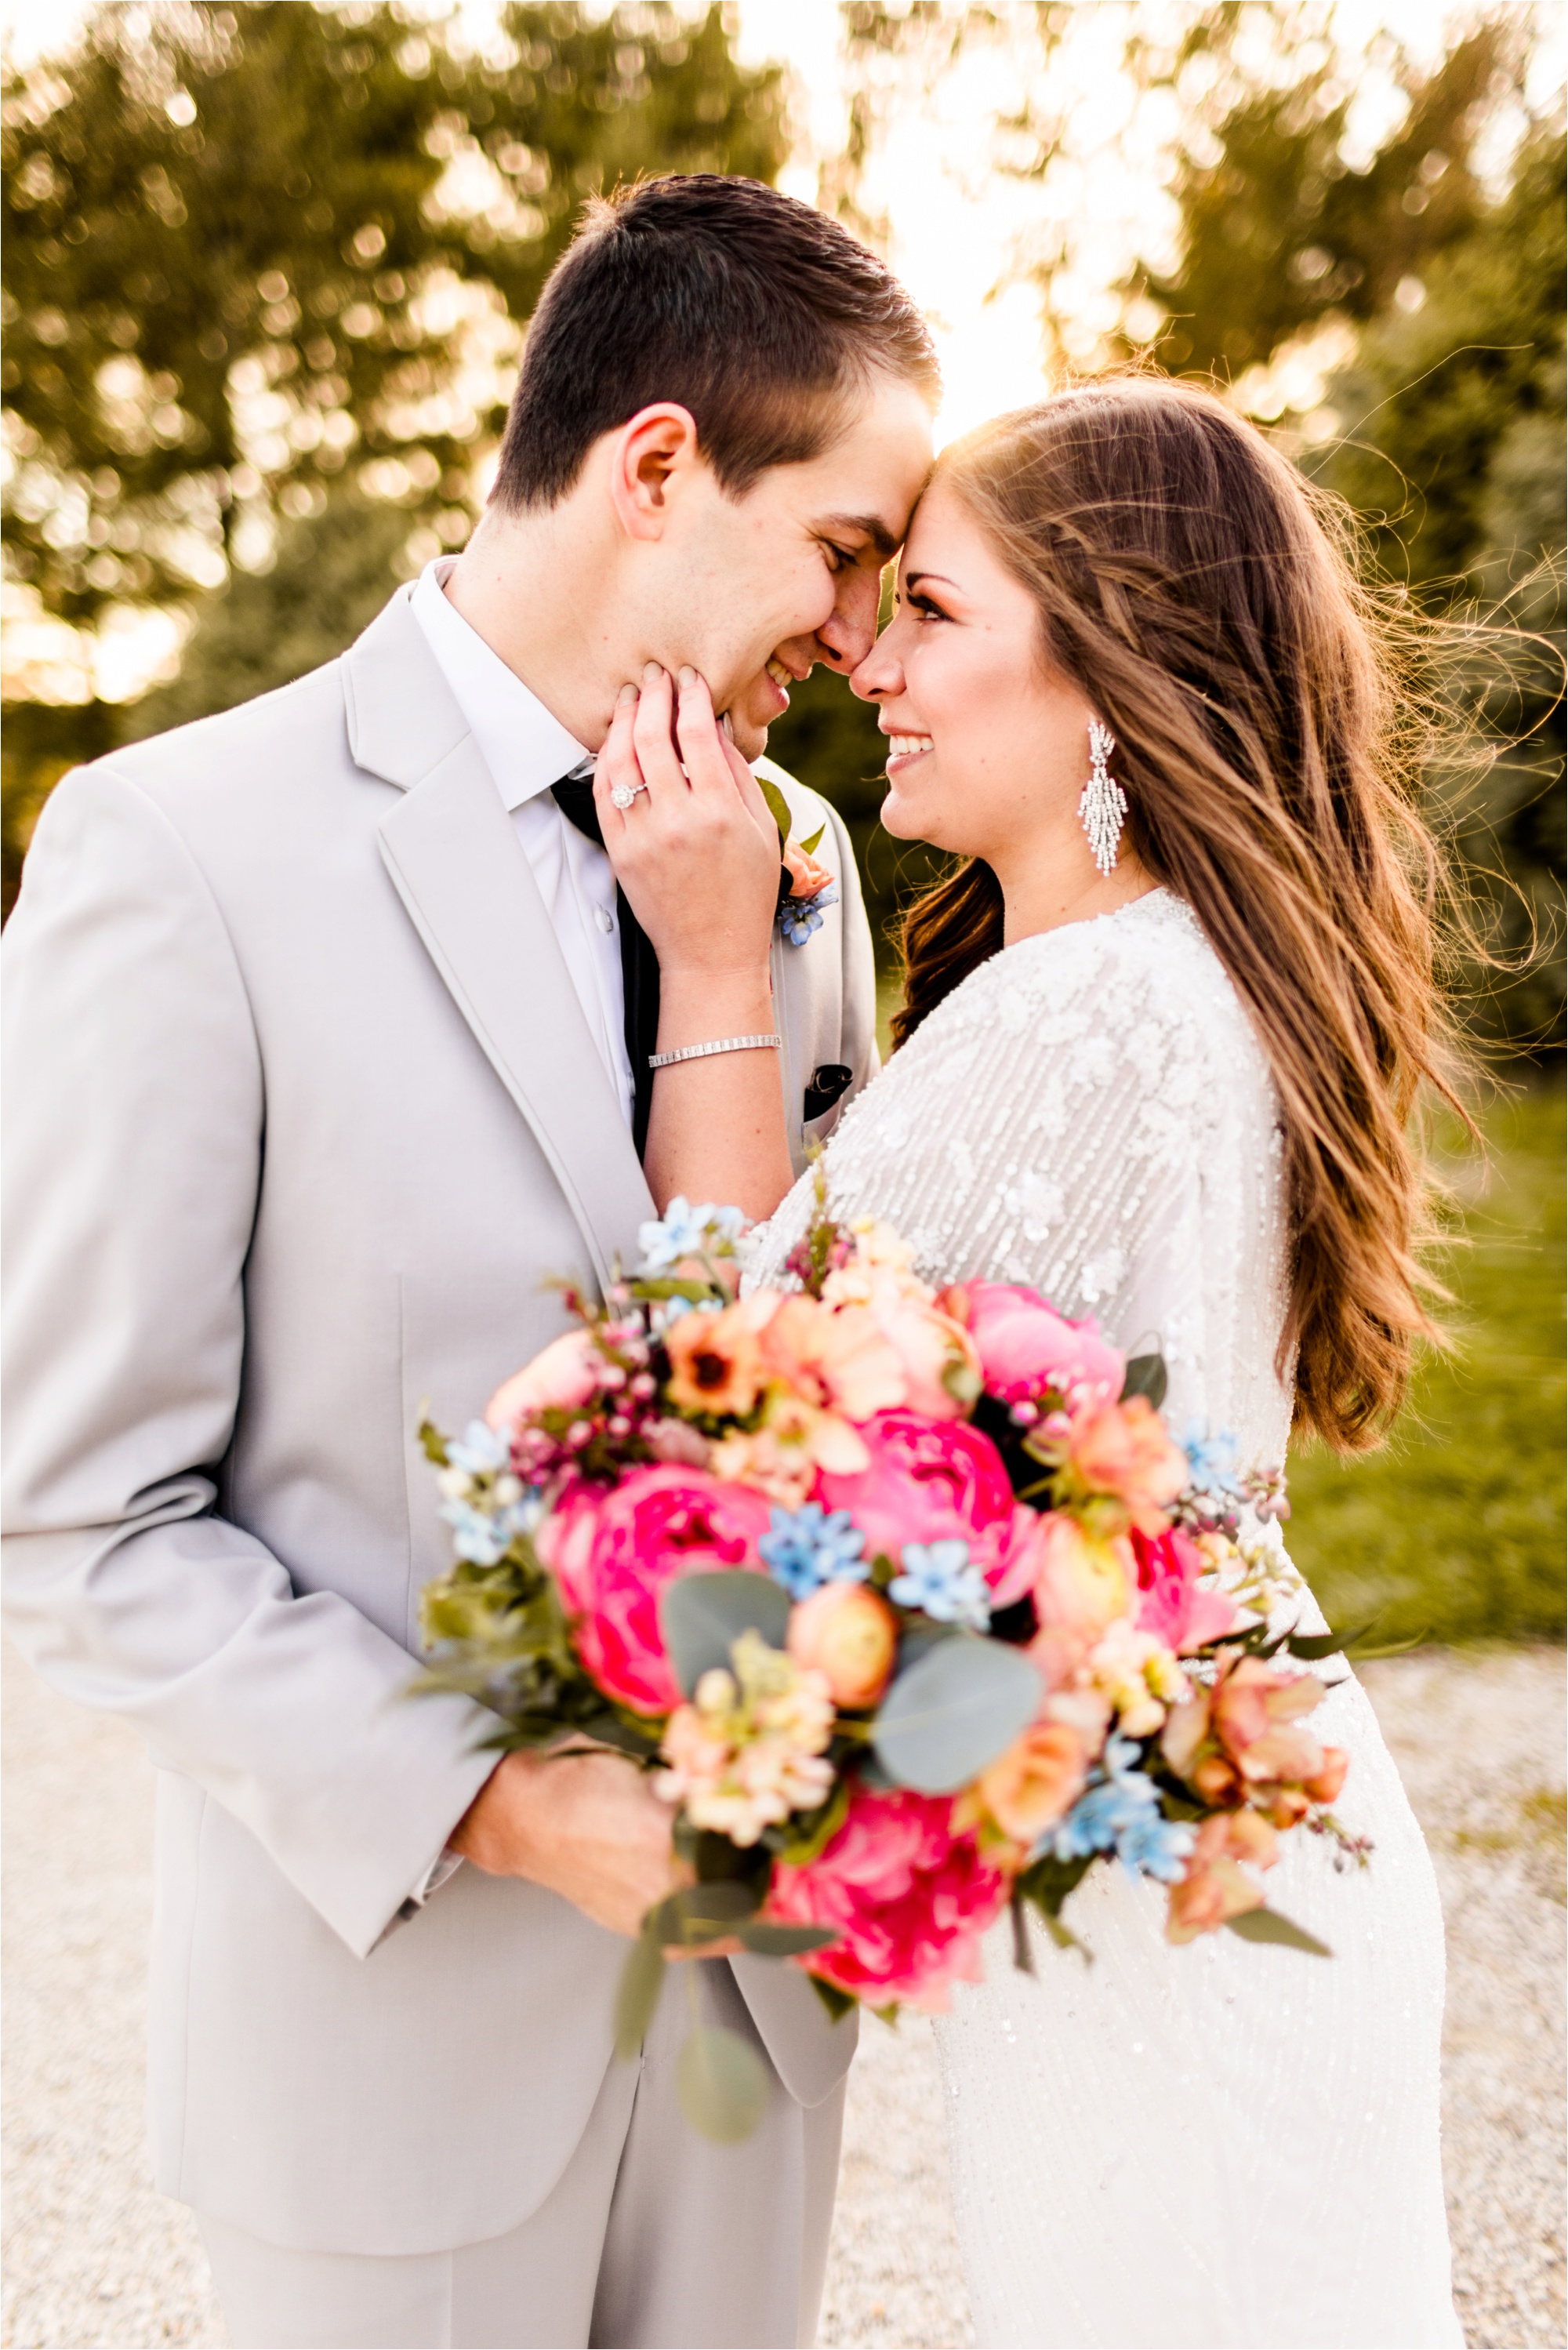 Caitlin and Luke Photography, Illinois Wedding Photographers, Champaign Wedding Photographers, Bloomington Normal Wedding Photographers, Romantic Red and Pink Sunset Styled Shoot_9590.jpg